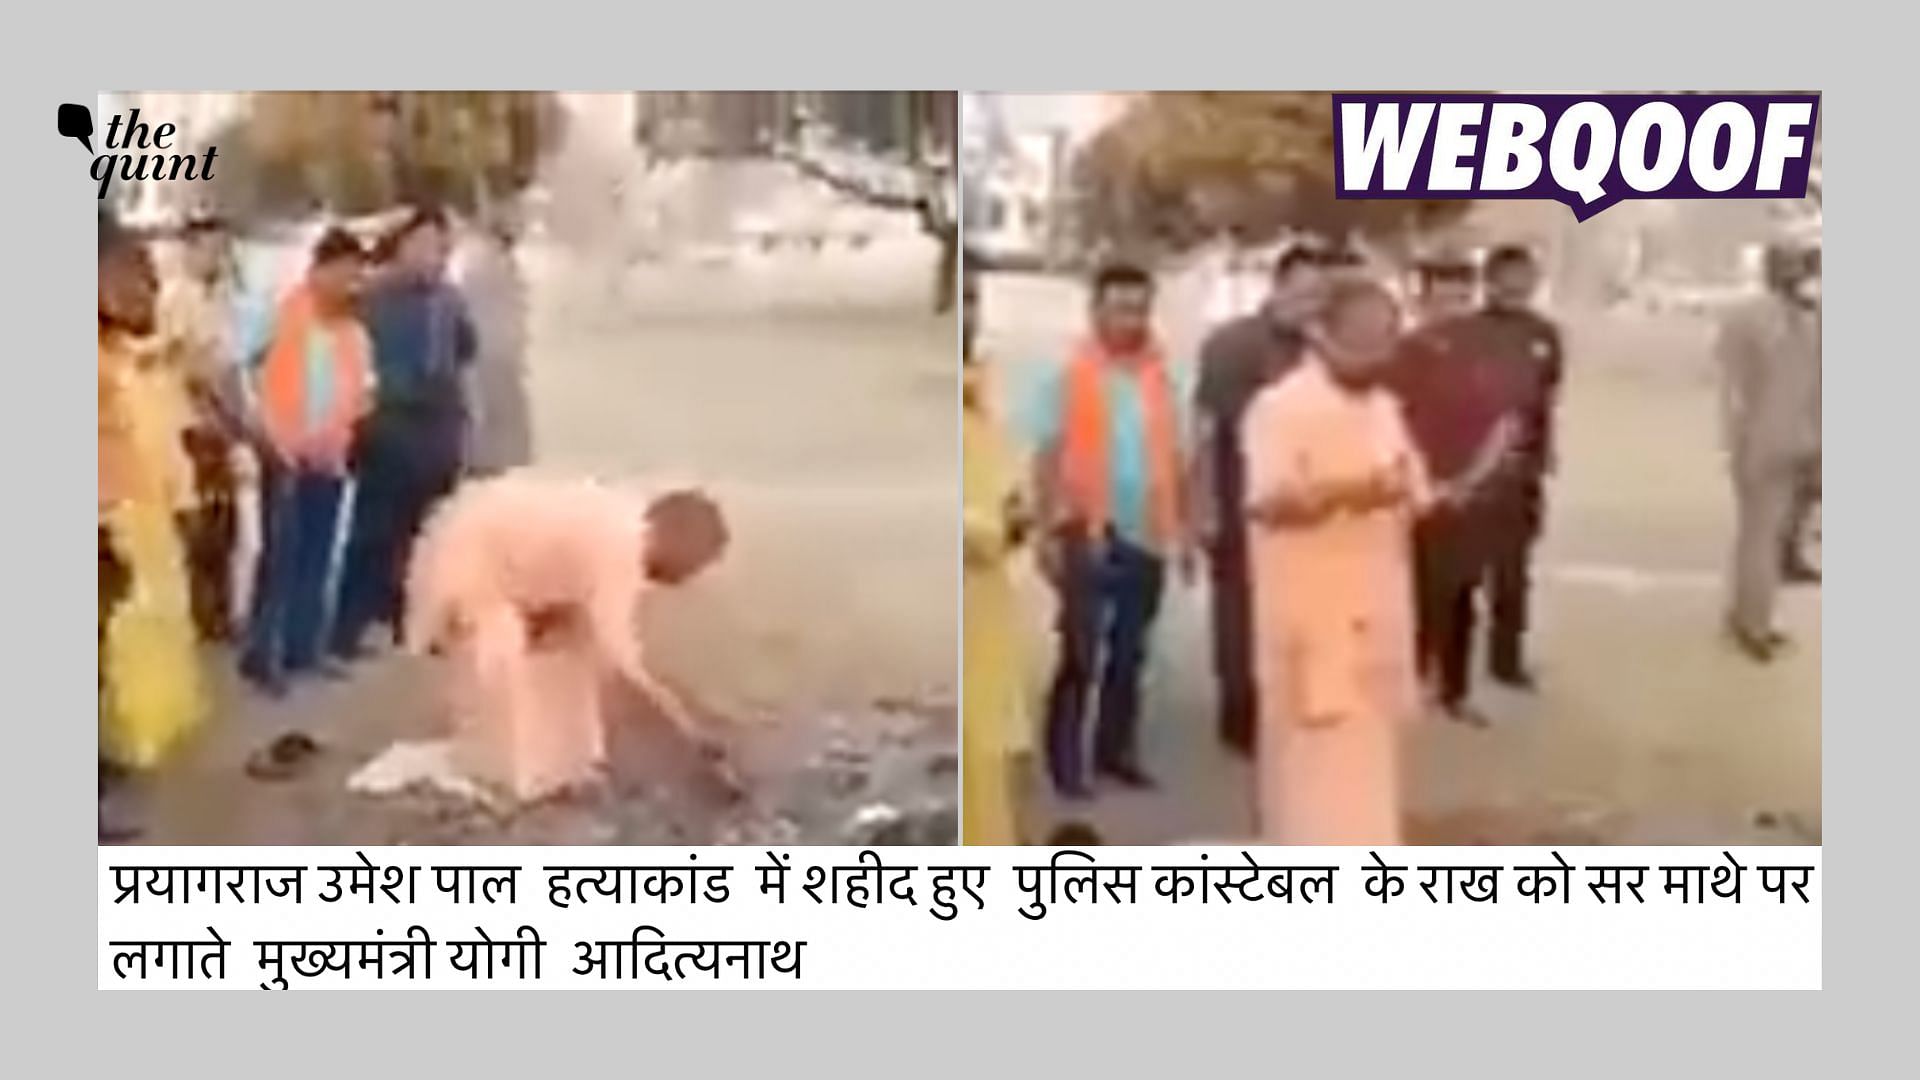 <div class="paragraphs"><p>A video of UP CM Yogi Adityanath applying ashes on his forehead is being shared in false claims.&nbsp;</p></div>